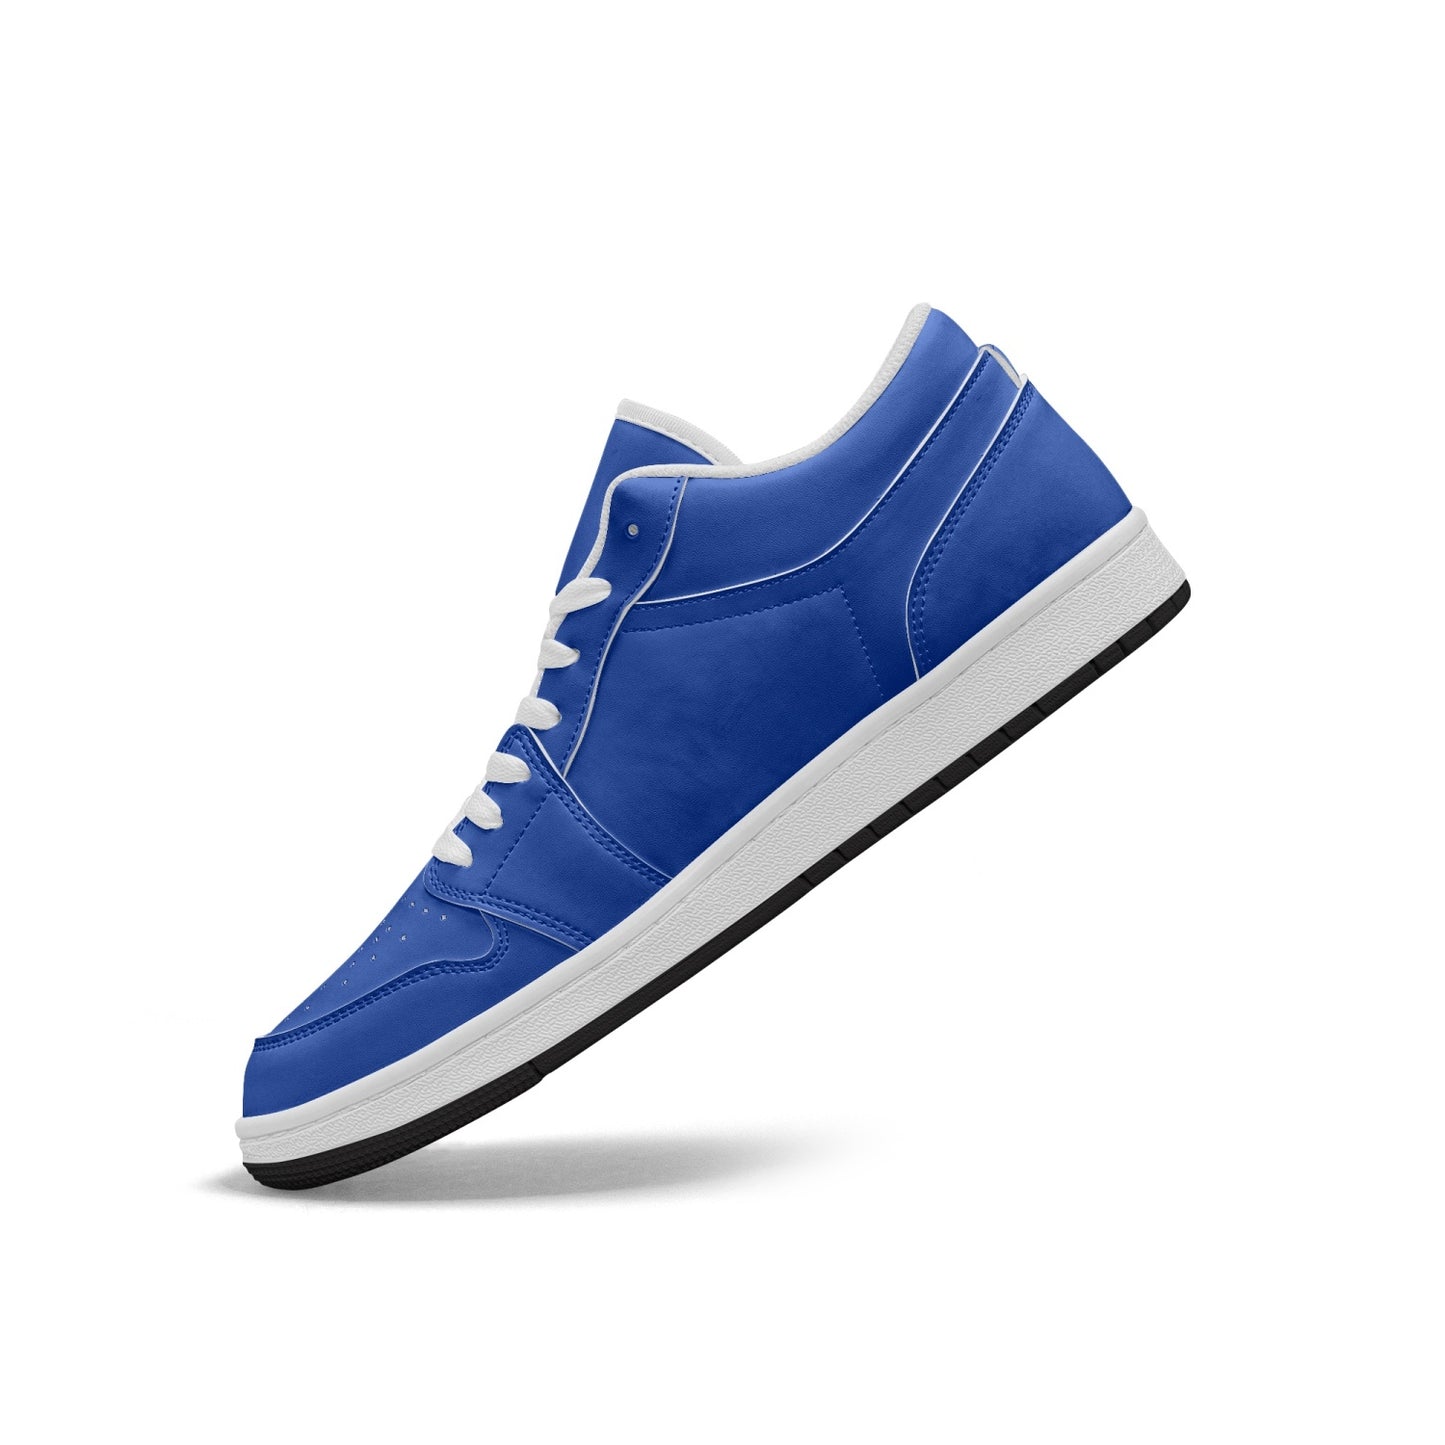 Israeli Blue Low-Top Leather Sneakers left white laces